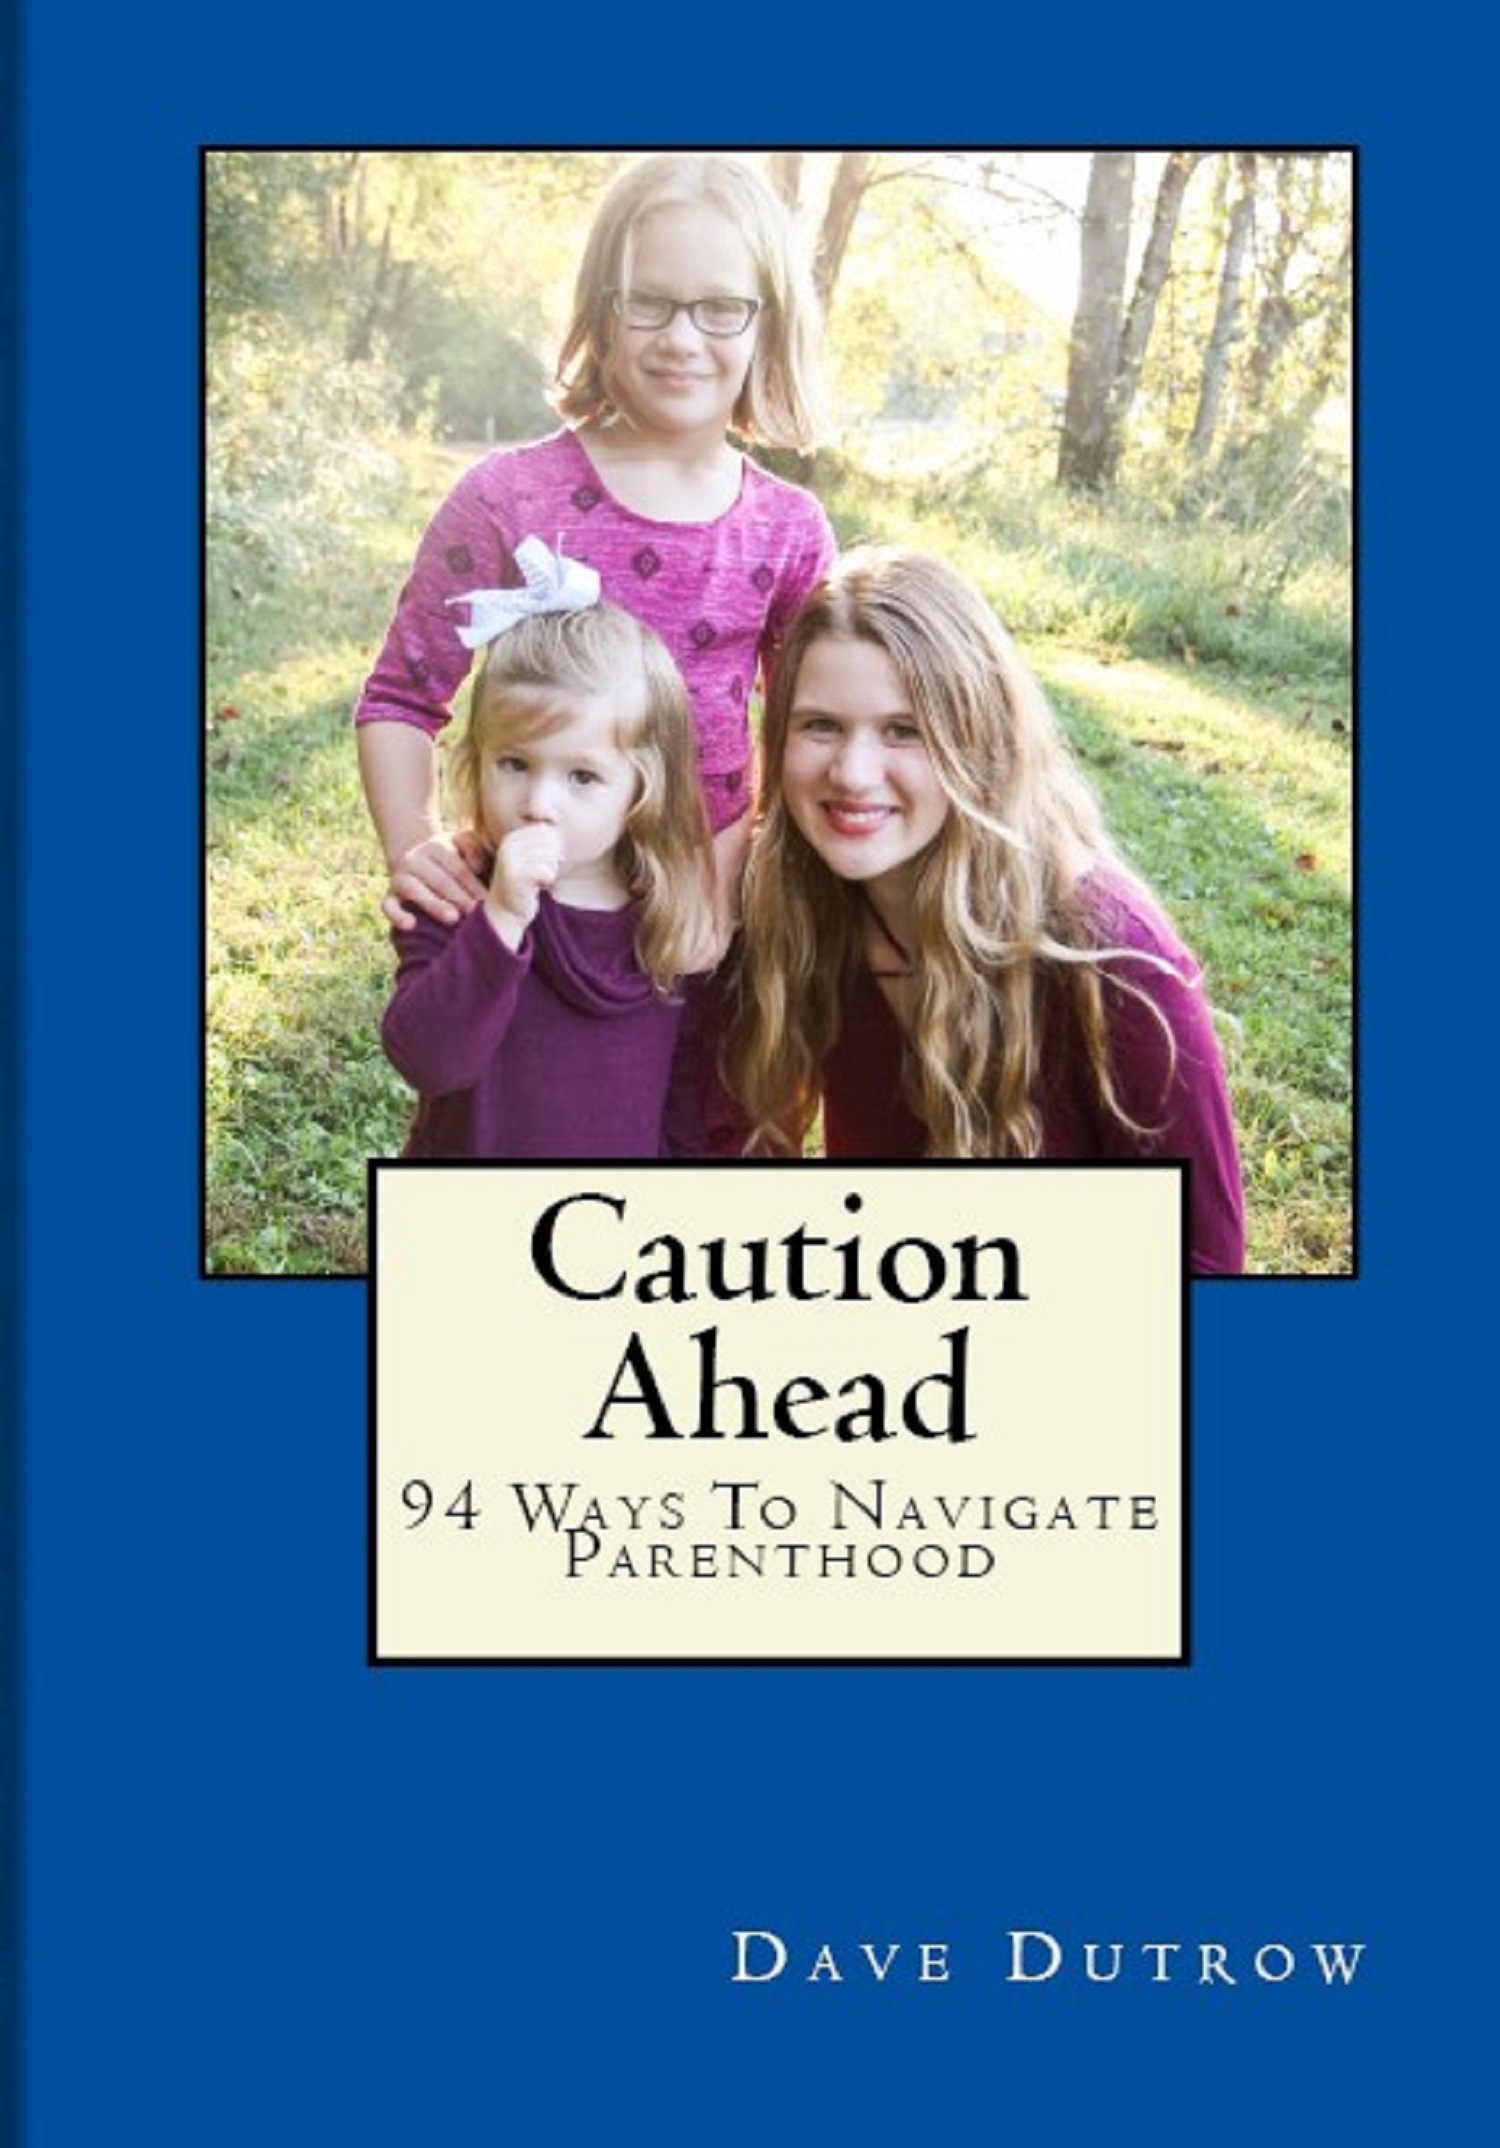 FREE: Caution Ahead: 94 Ways to Navigate Parenting by Dave Dutrow